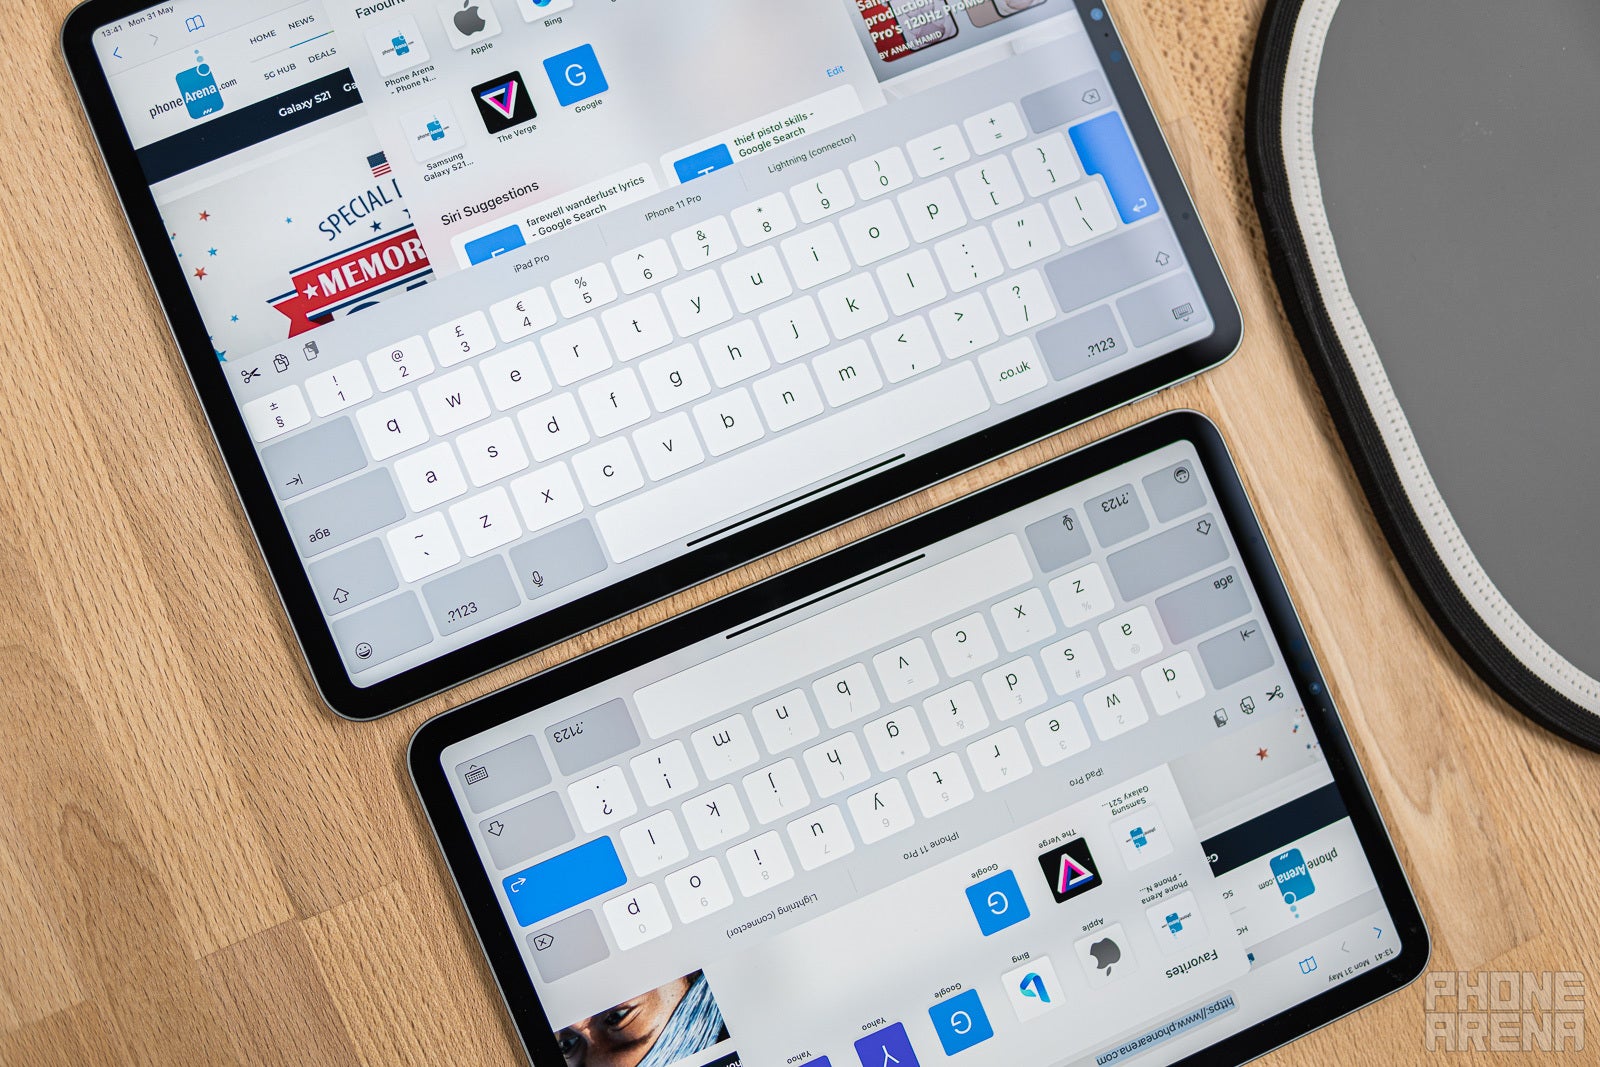 The iPad will never get macOS, this is why